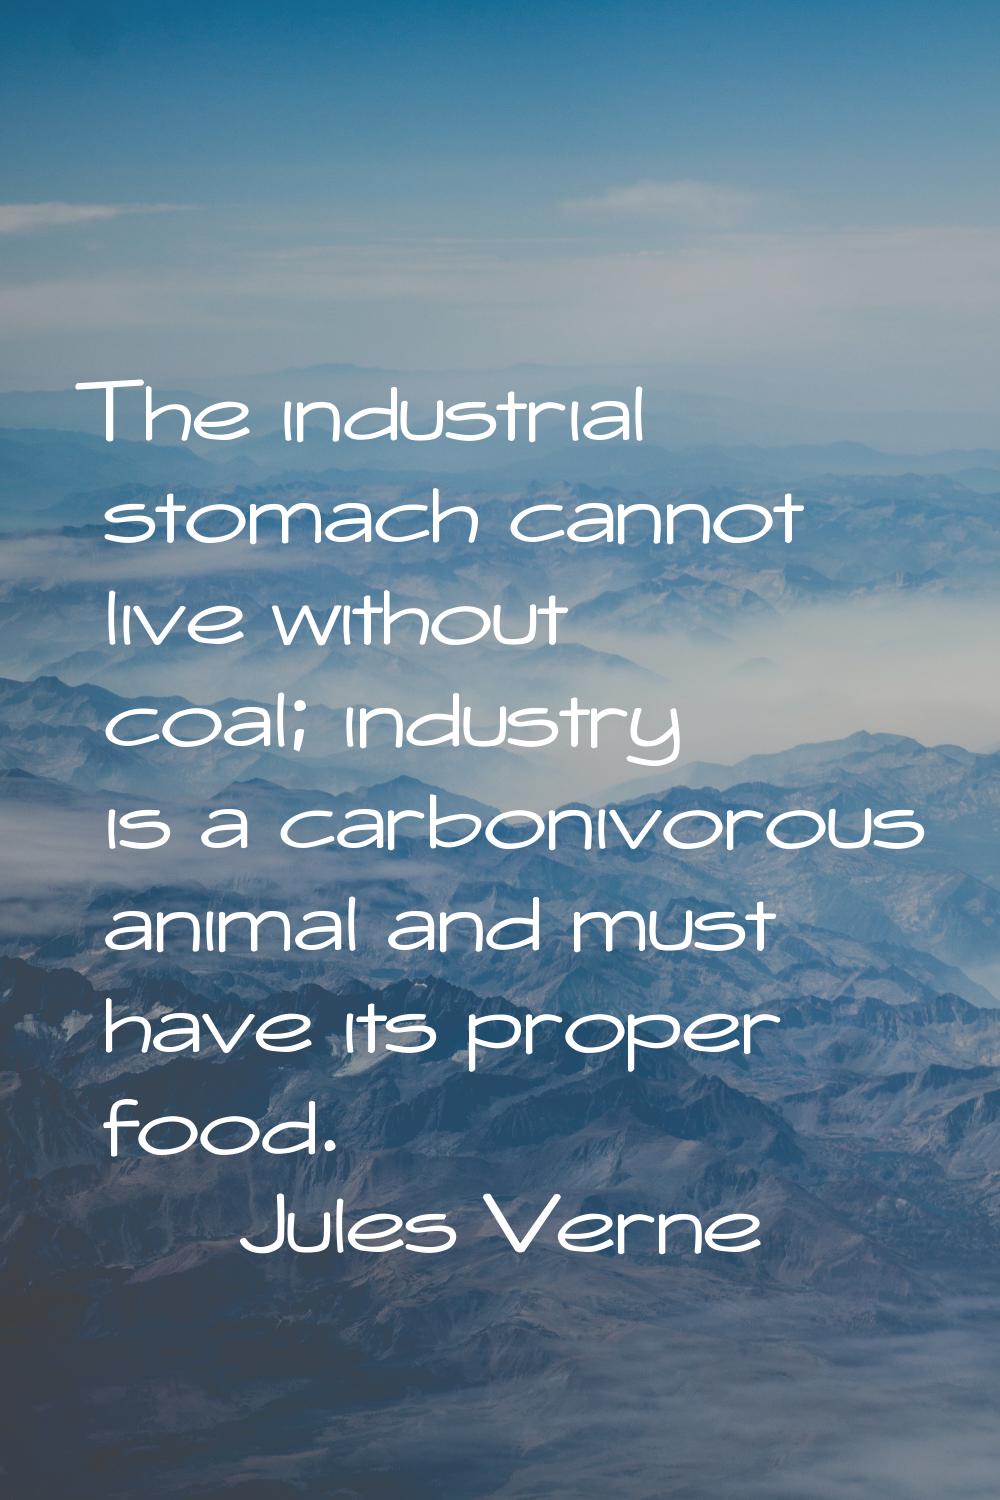 The industrial stomach cannot live without coal; industry is a carbonivorous animal and must have i